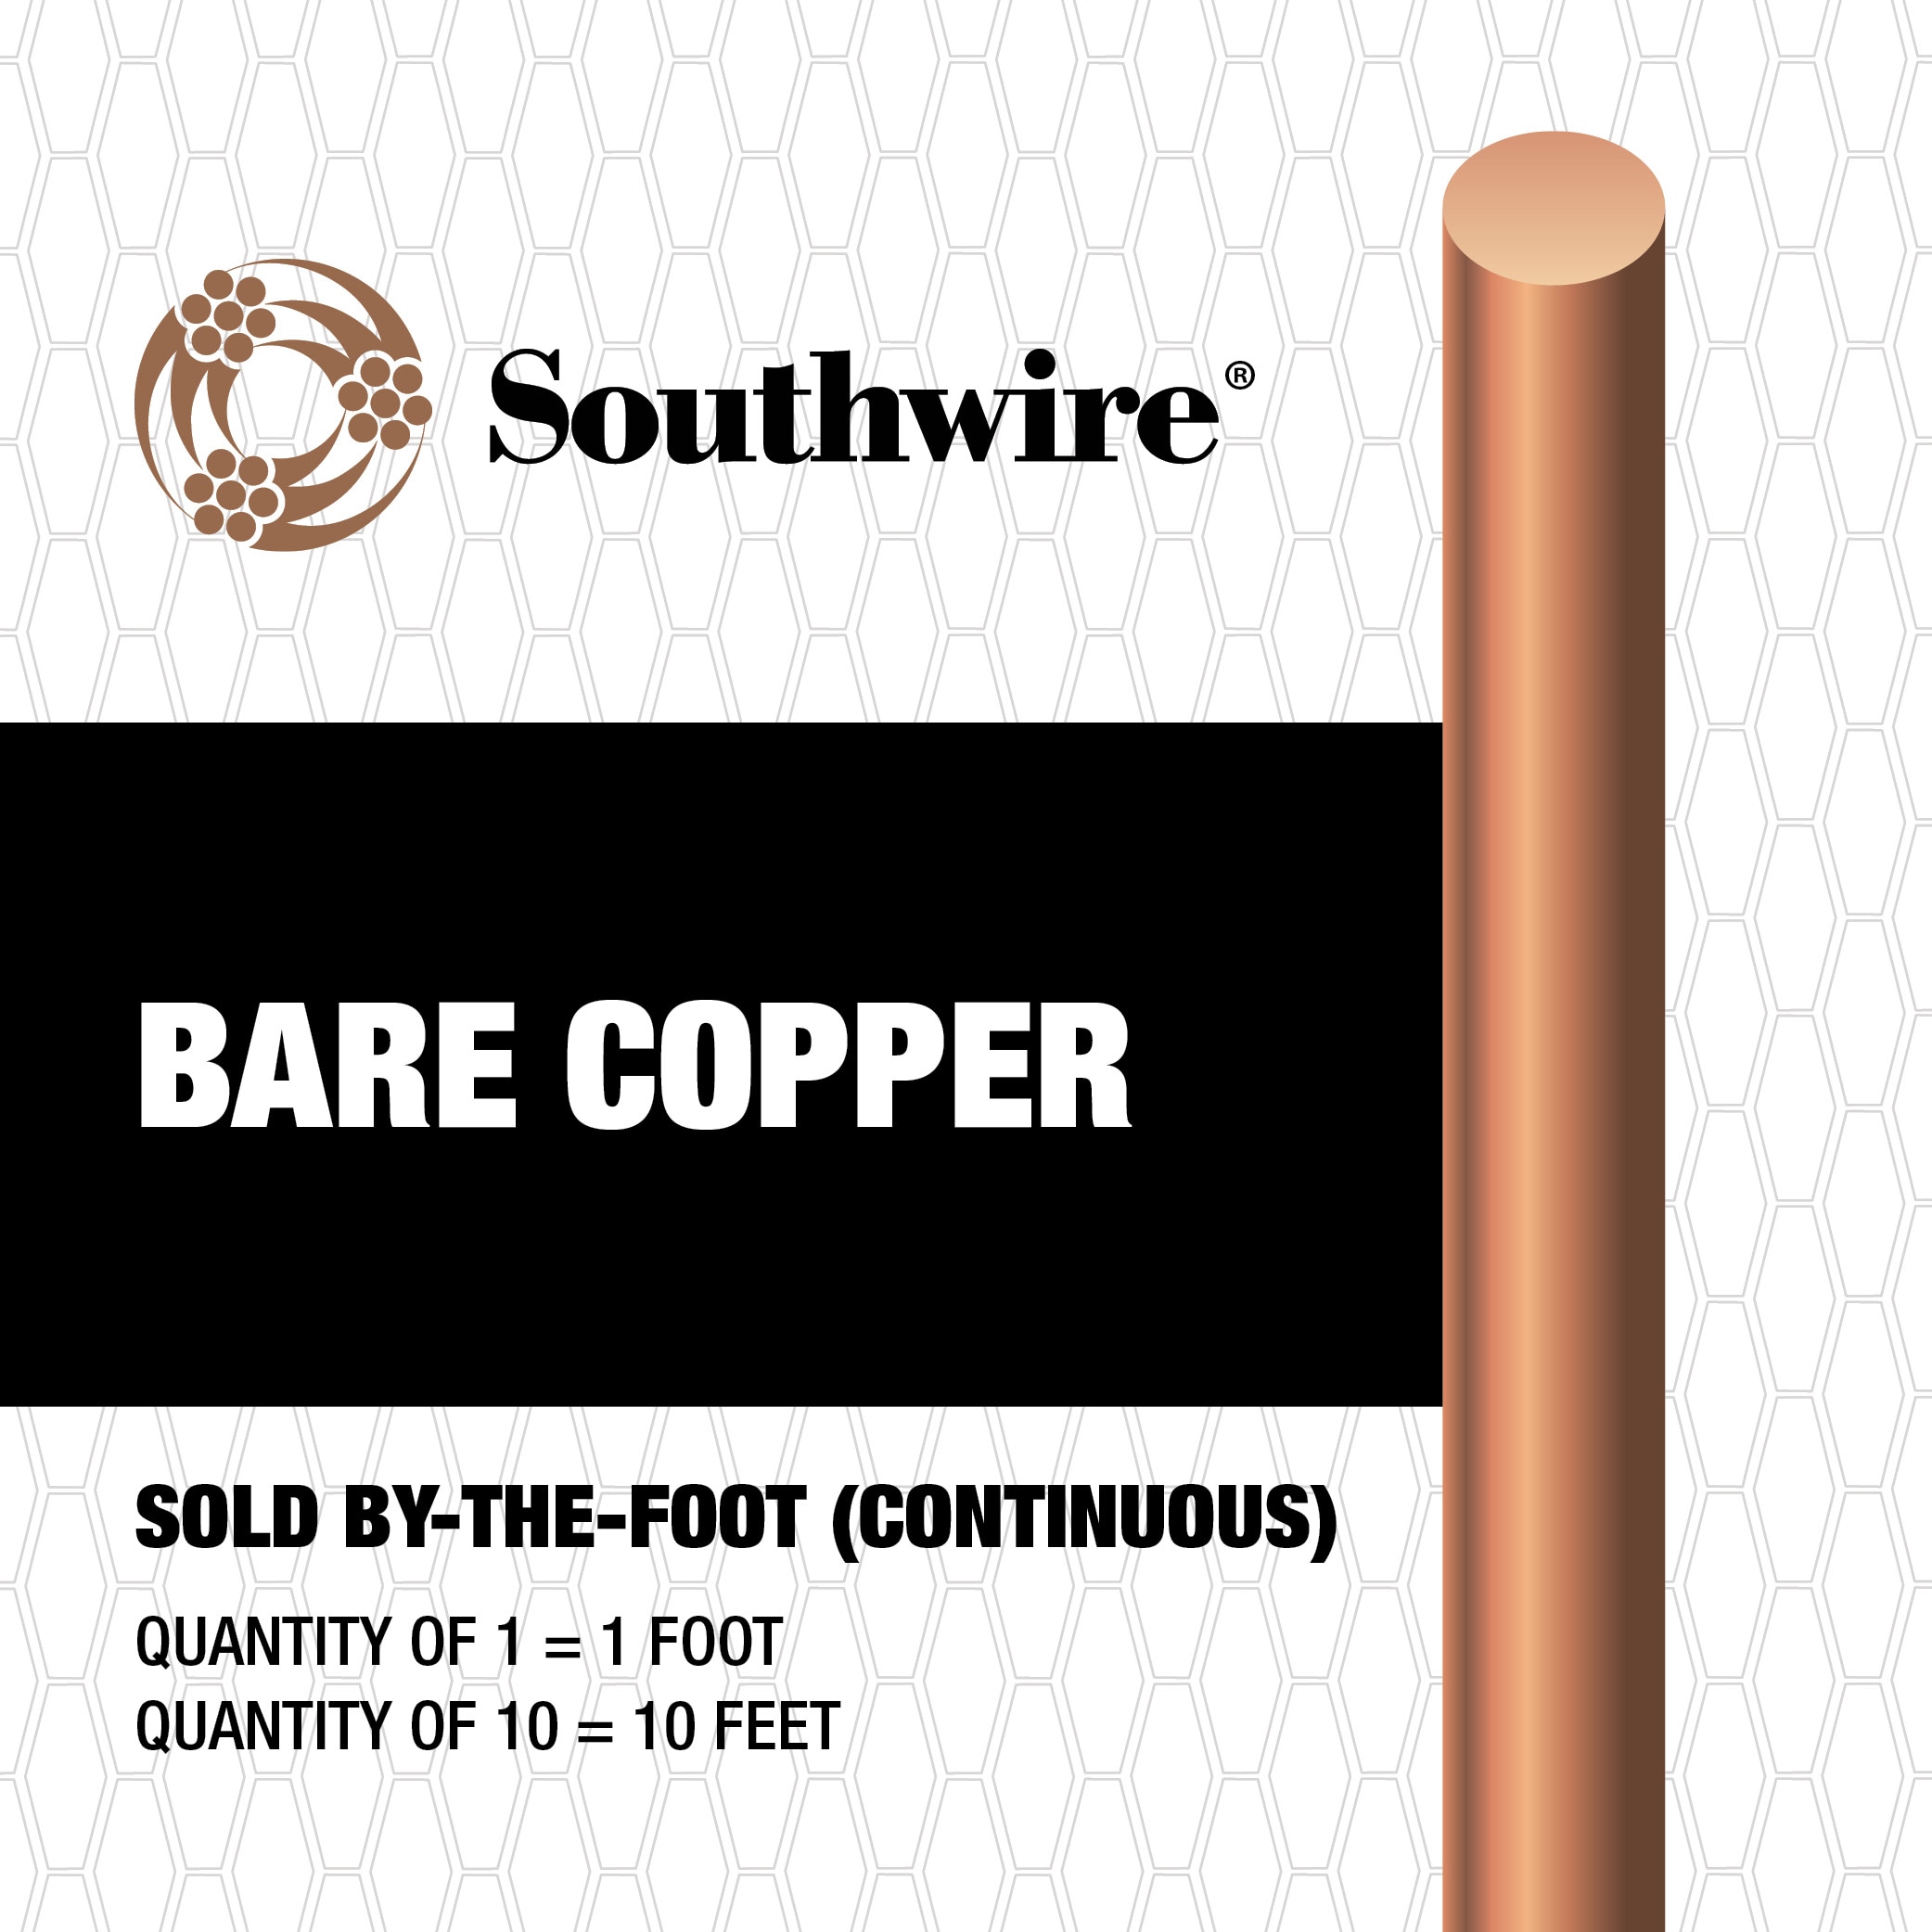 Southwire 1-ft 8-Gauge Solid Soft Drawn Copper Bare Wire (By-the